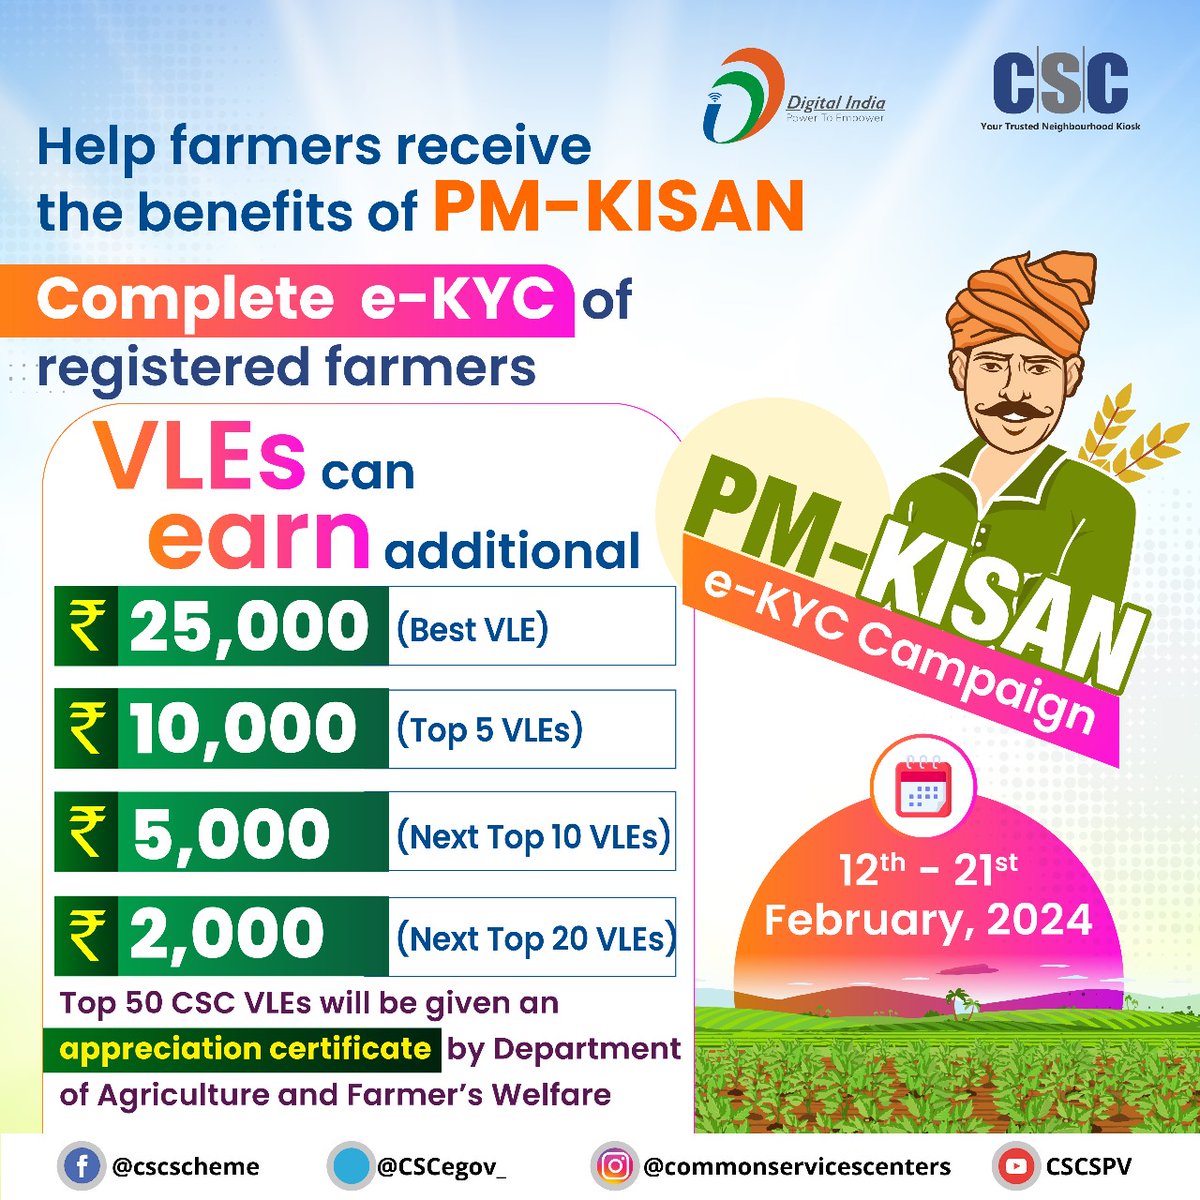 The 16th Installment of the #PMKisanSammanNidhi Yojana is being released! Help registered farmers complete their e-KYC to receive the benefit. Rewards and Appreciation Certificates await for best-performing VLEs! Visit: pmkisan.gov.in Contact: ecommerce@csc.gov.in